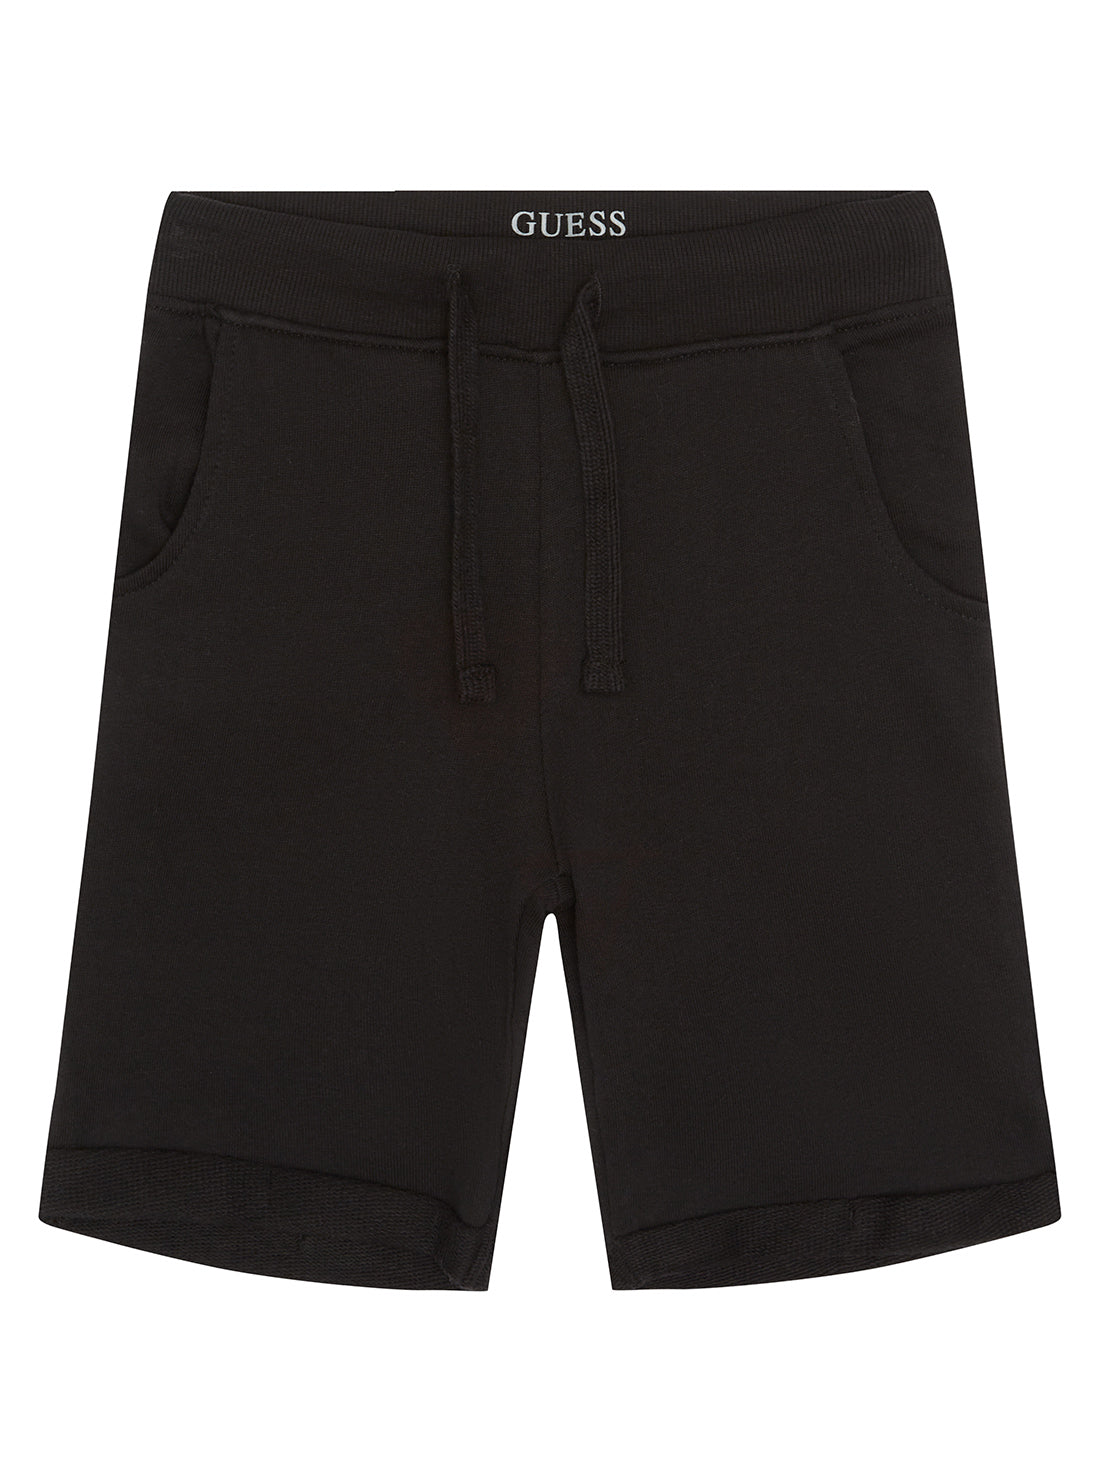 GUESS Little Boy Black Active Shorts (2-7) N93Q18KAUG0 Front View